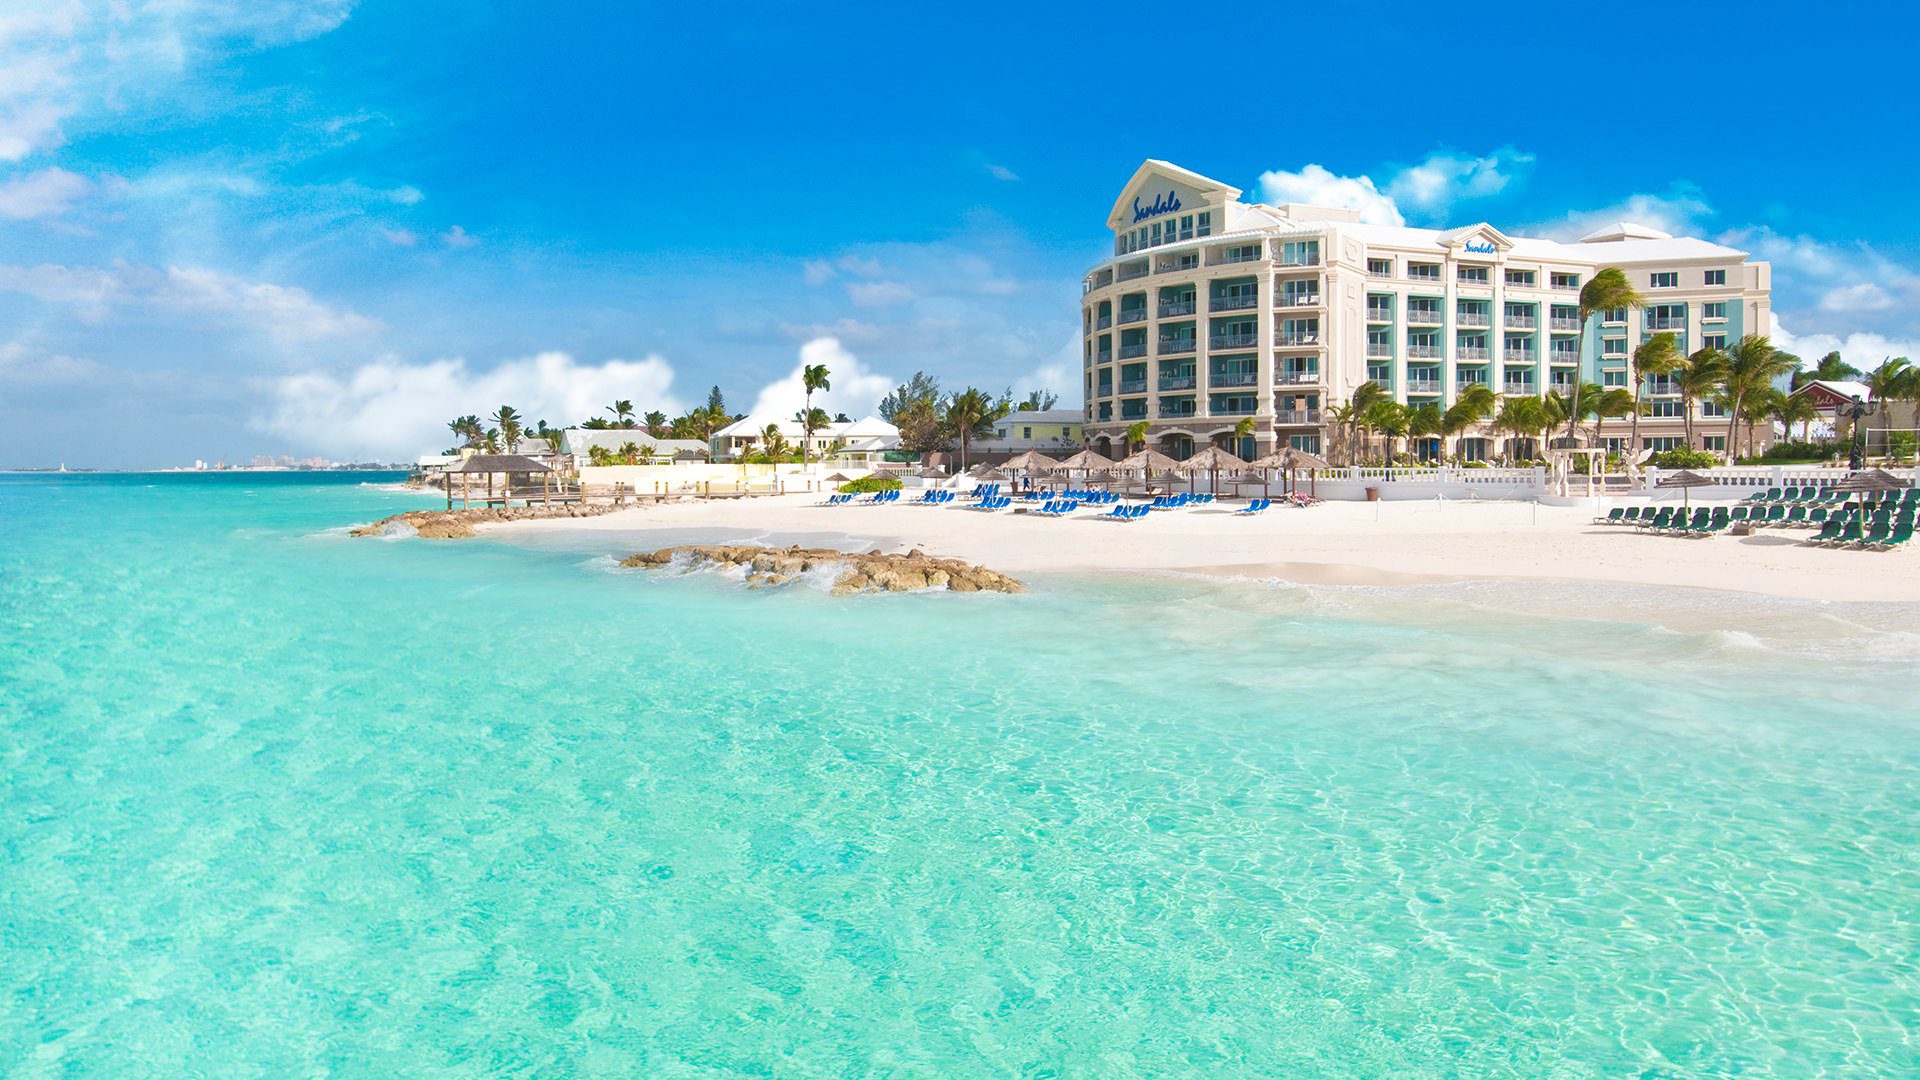 Sandals Resorts News: New Properties, Expansions & More